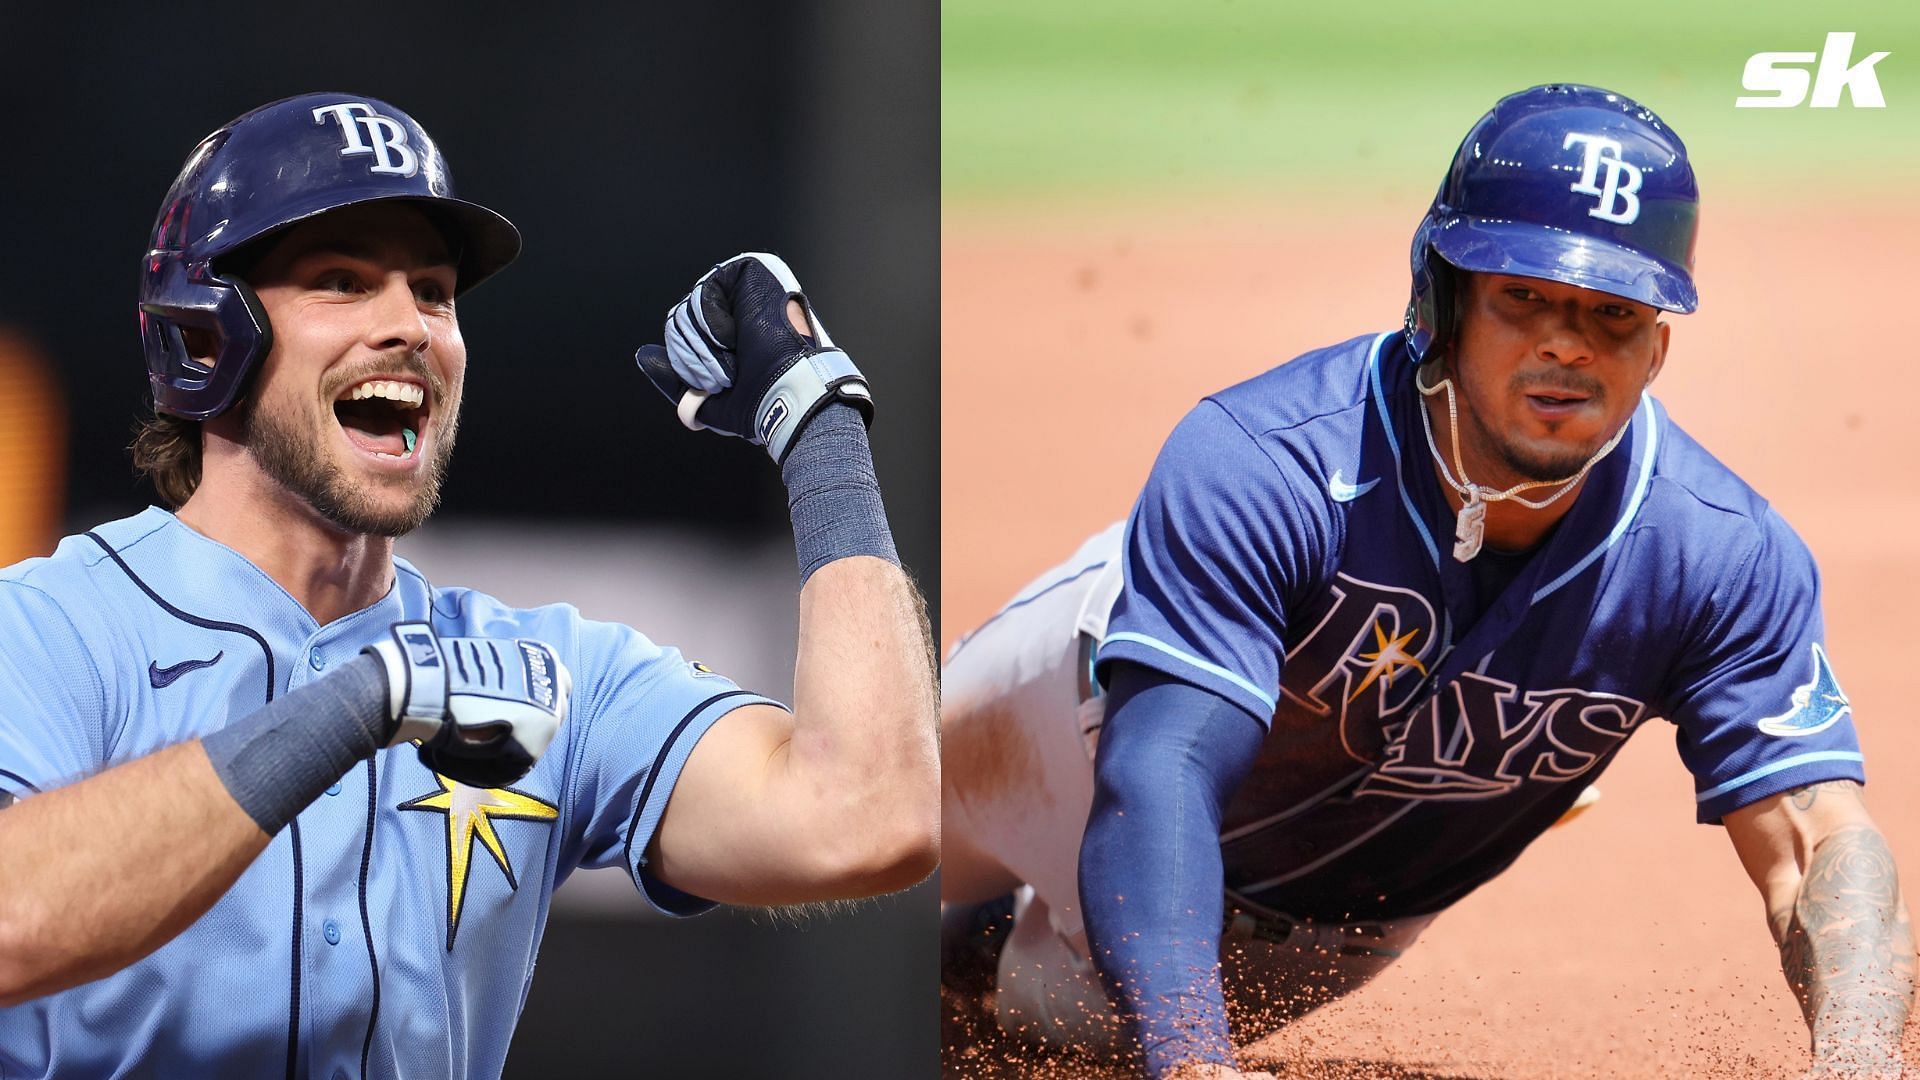 The Rays seem to be doing just fine without Wander Franco in the lineup